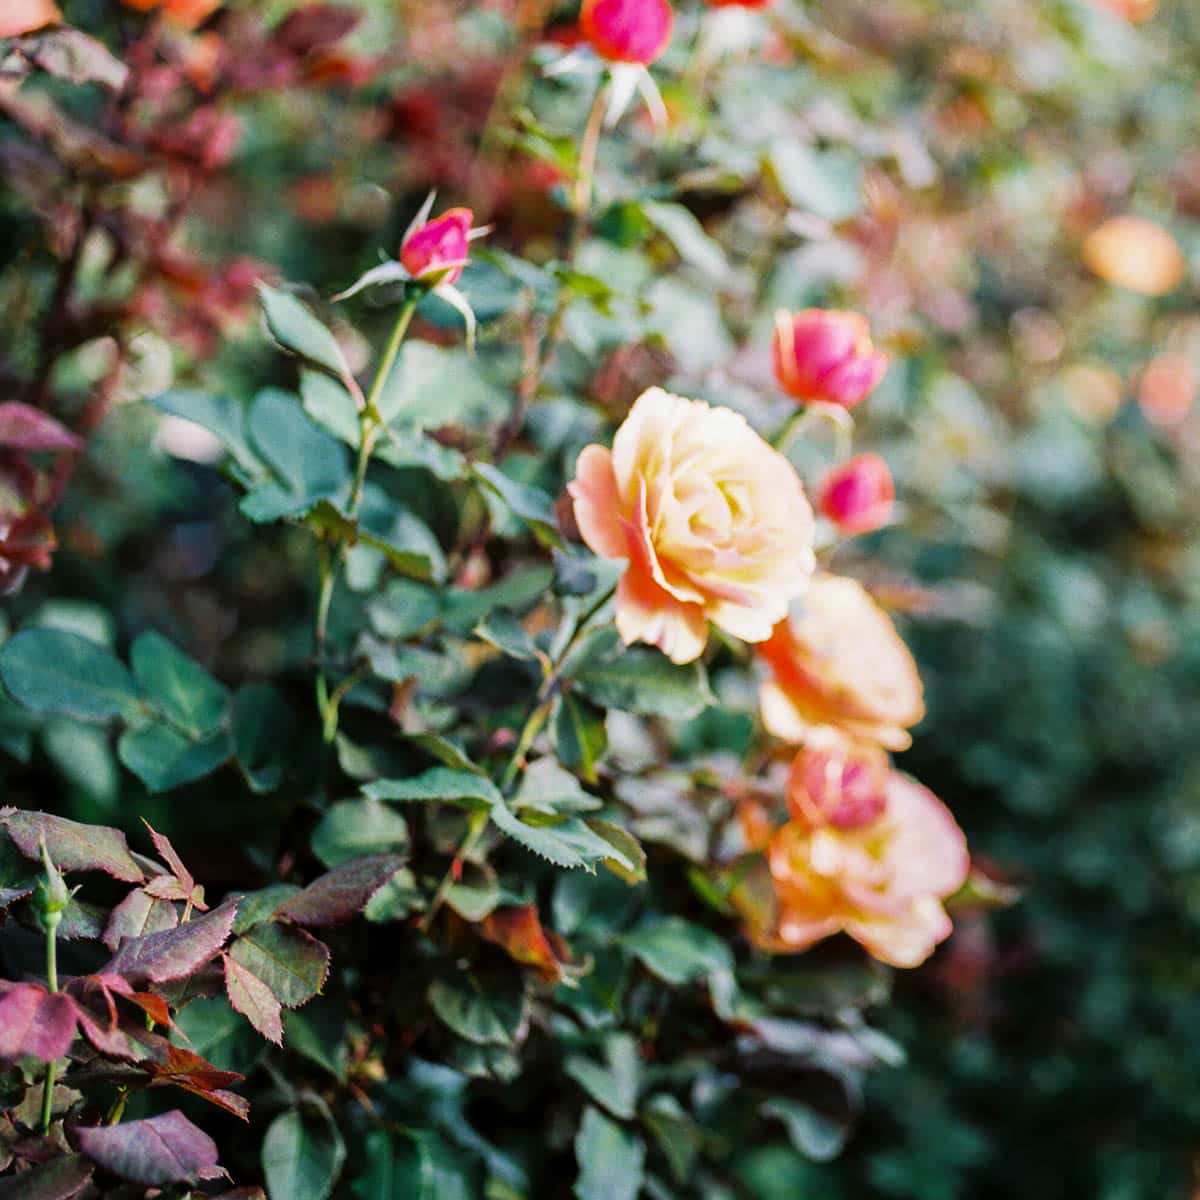 Best Local Guide To The Portland Rose Garden